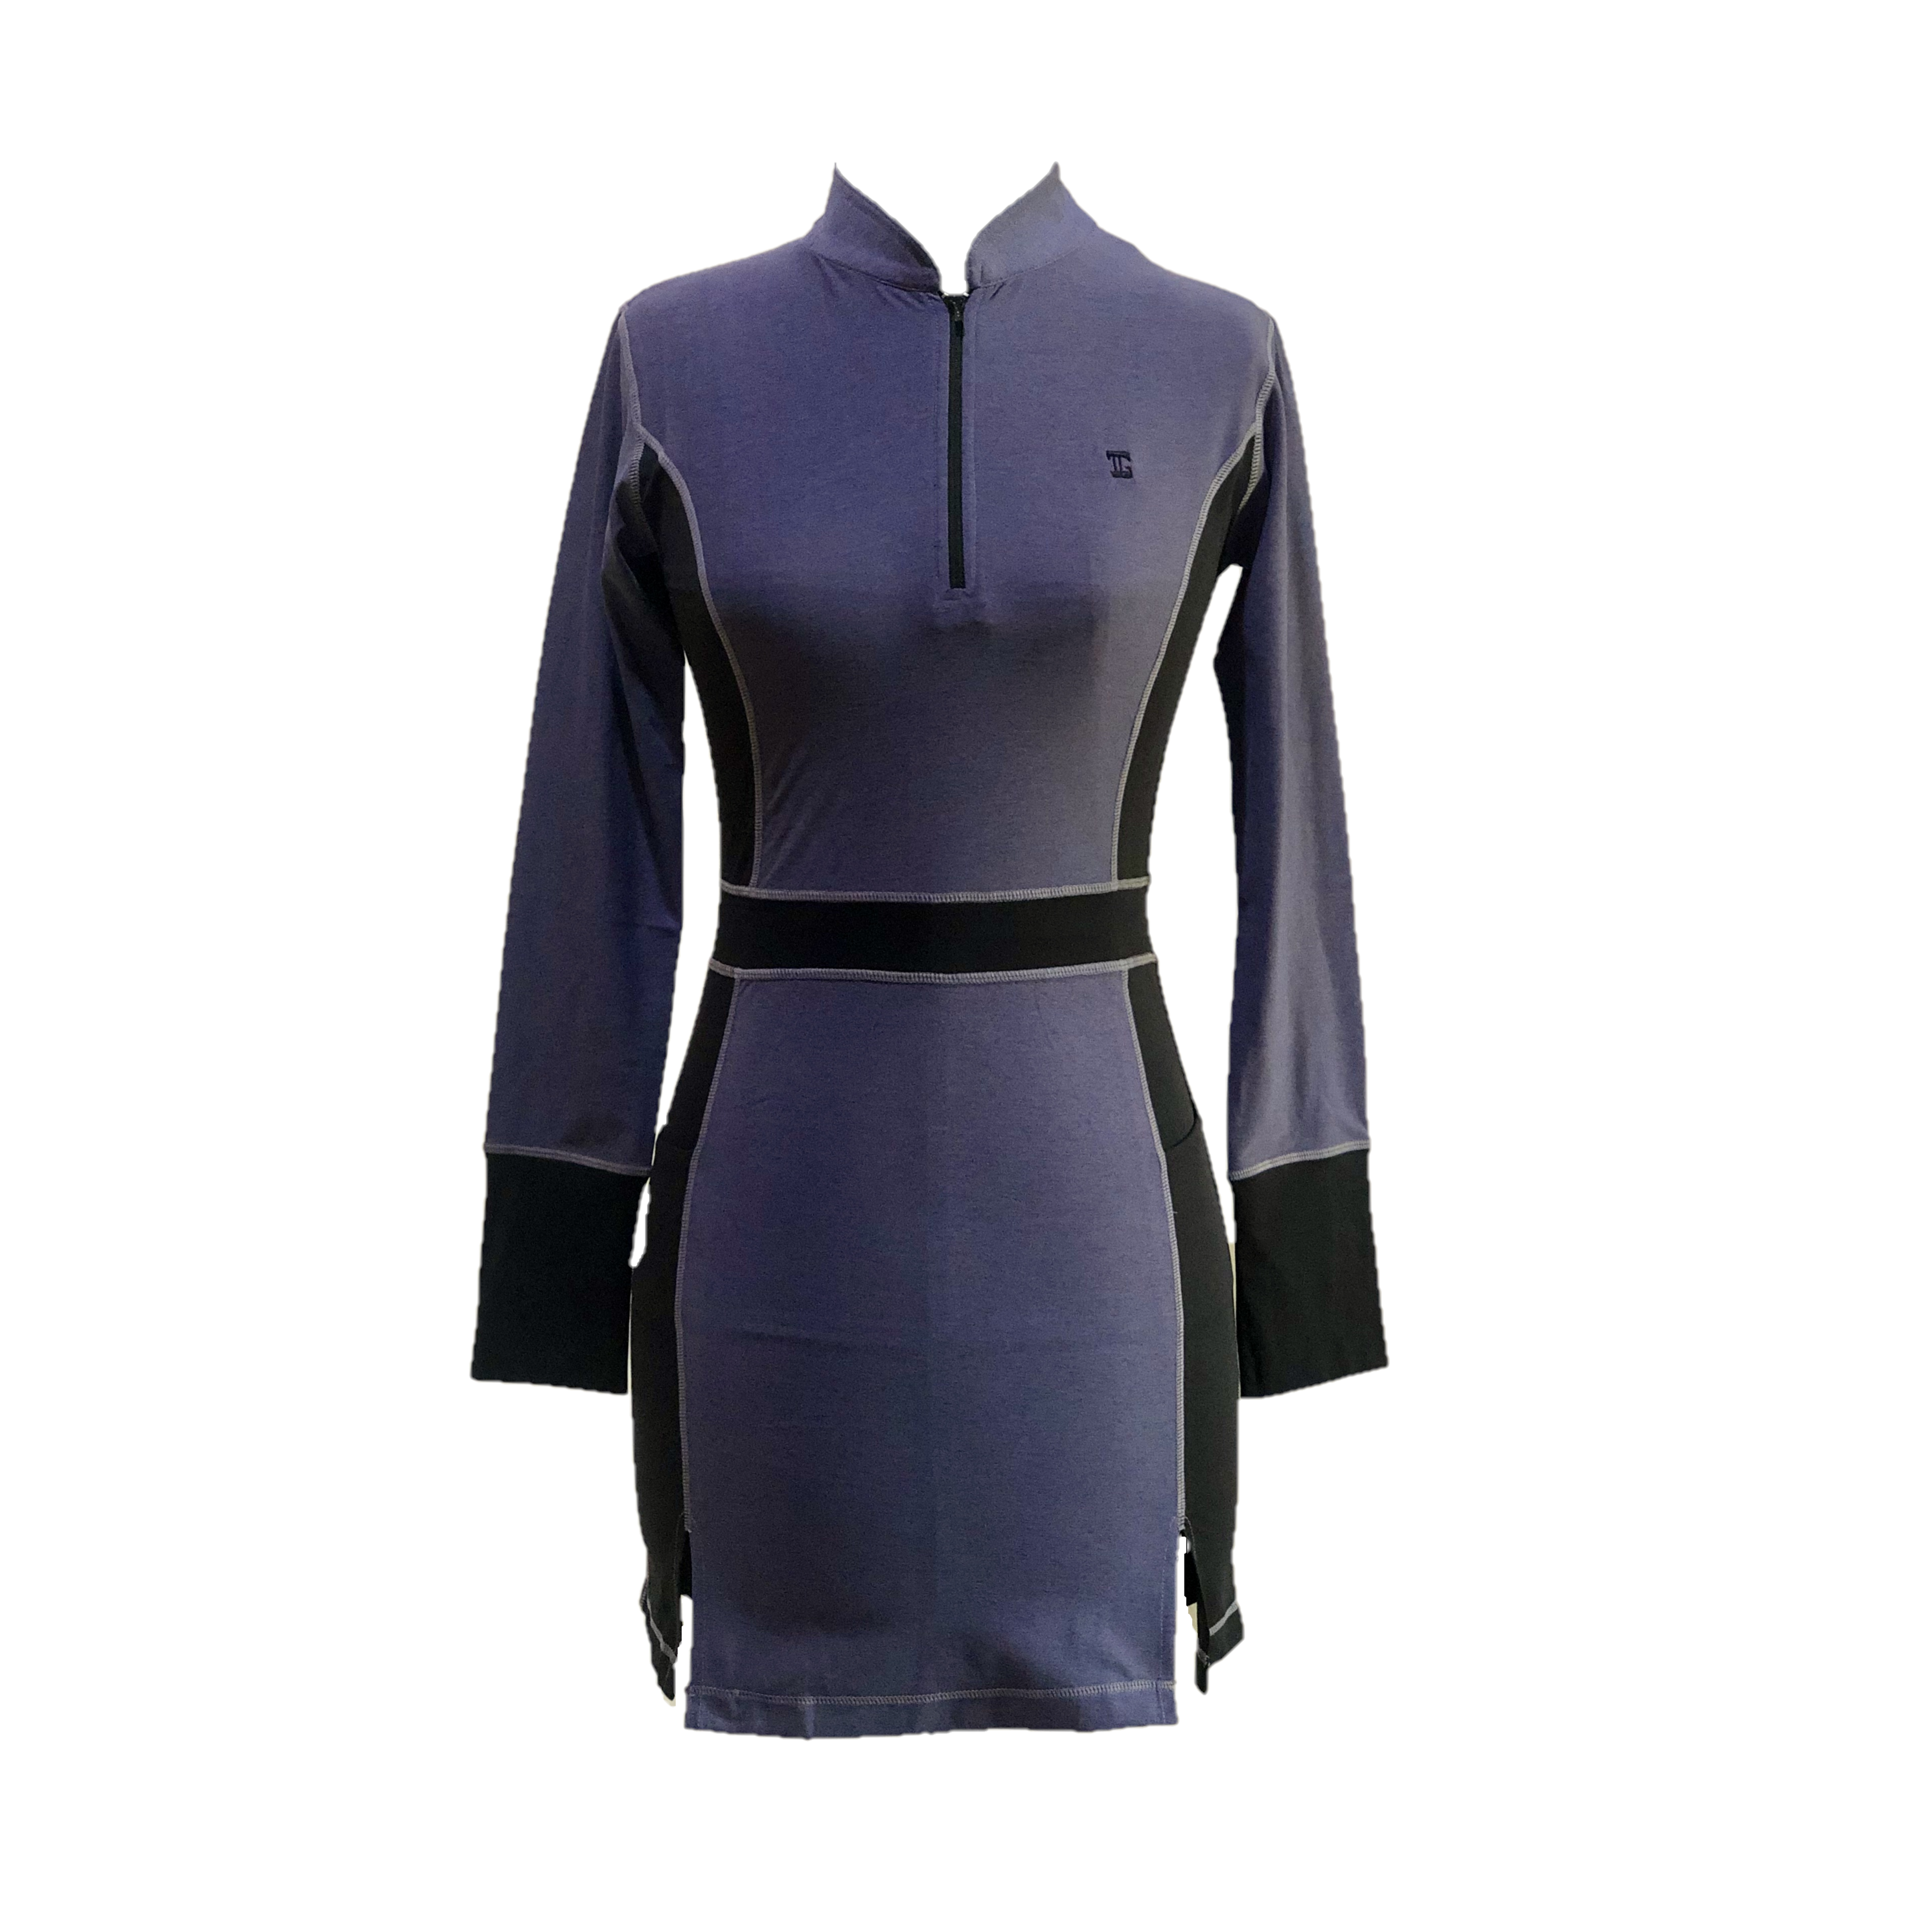 GD – 016C || Golf Dress Long Sleeve Monalisa Blue With Black Half Belted Waist Cuff Belted Under Arm Side Pannel Zipper Mandarin Type Collar With Peacked Back Section.